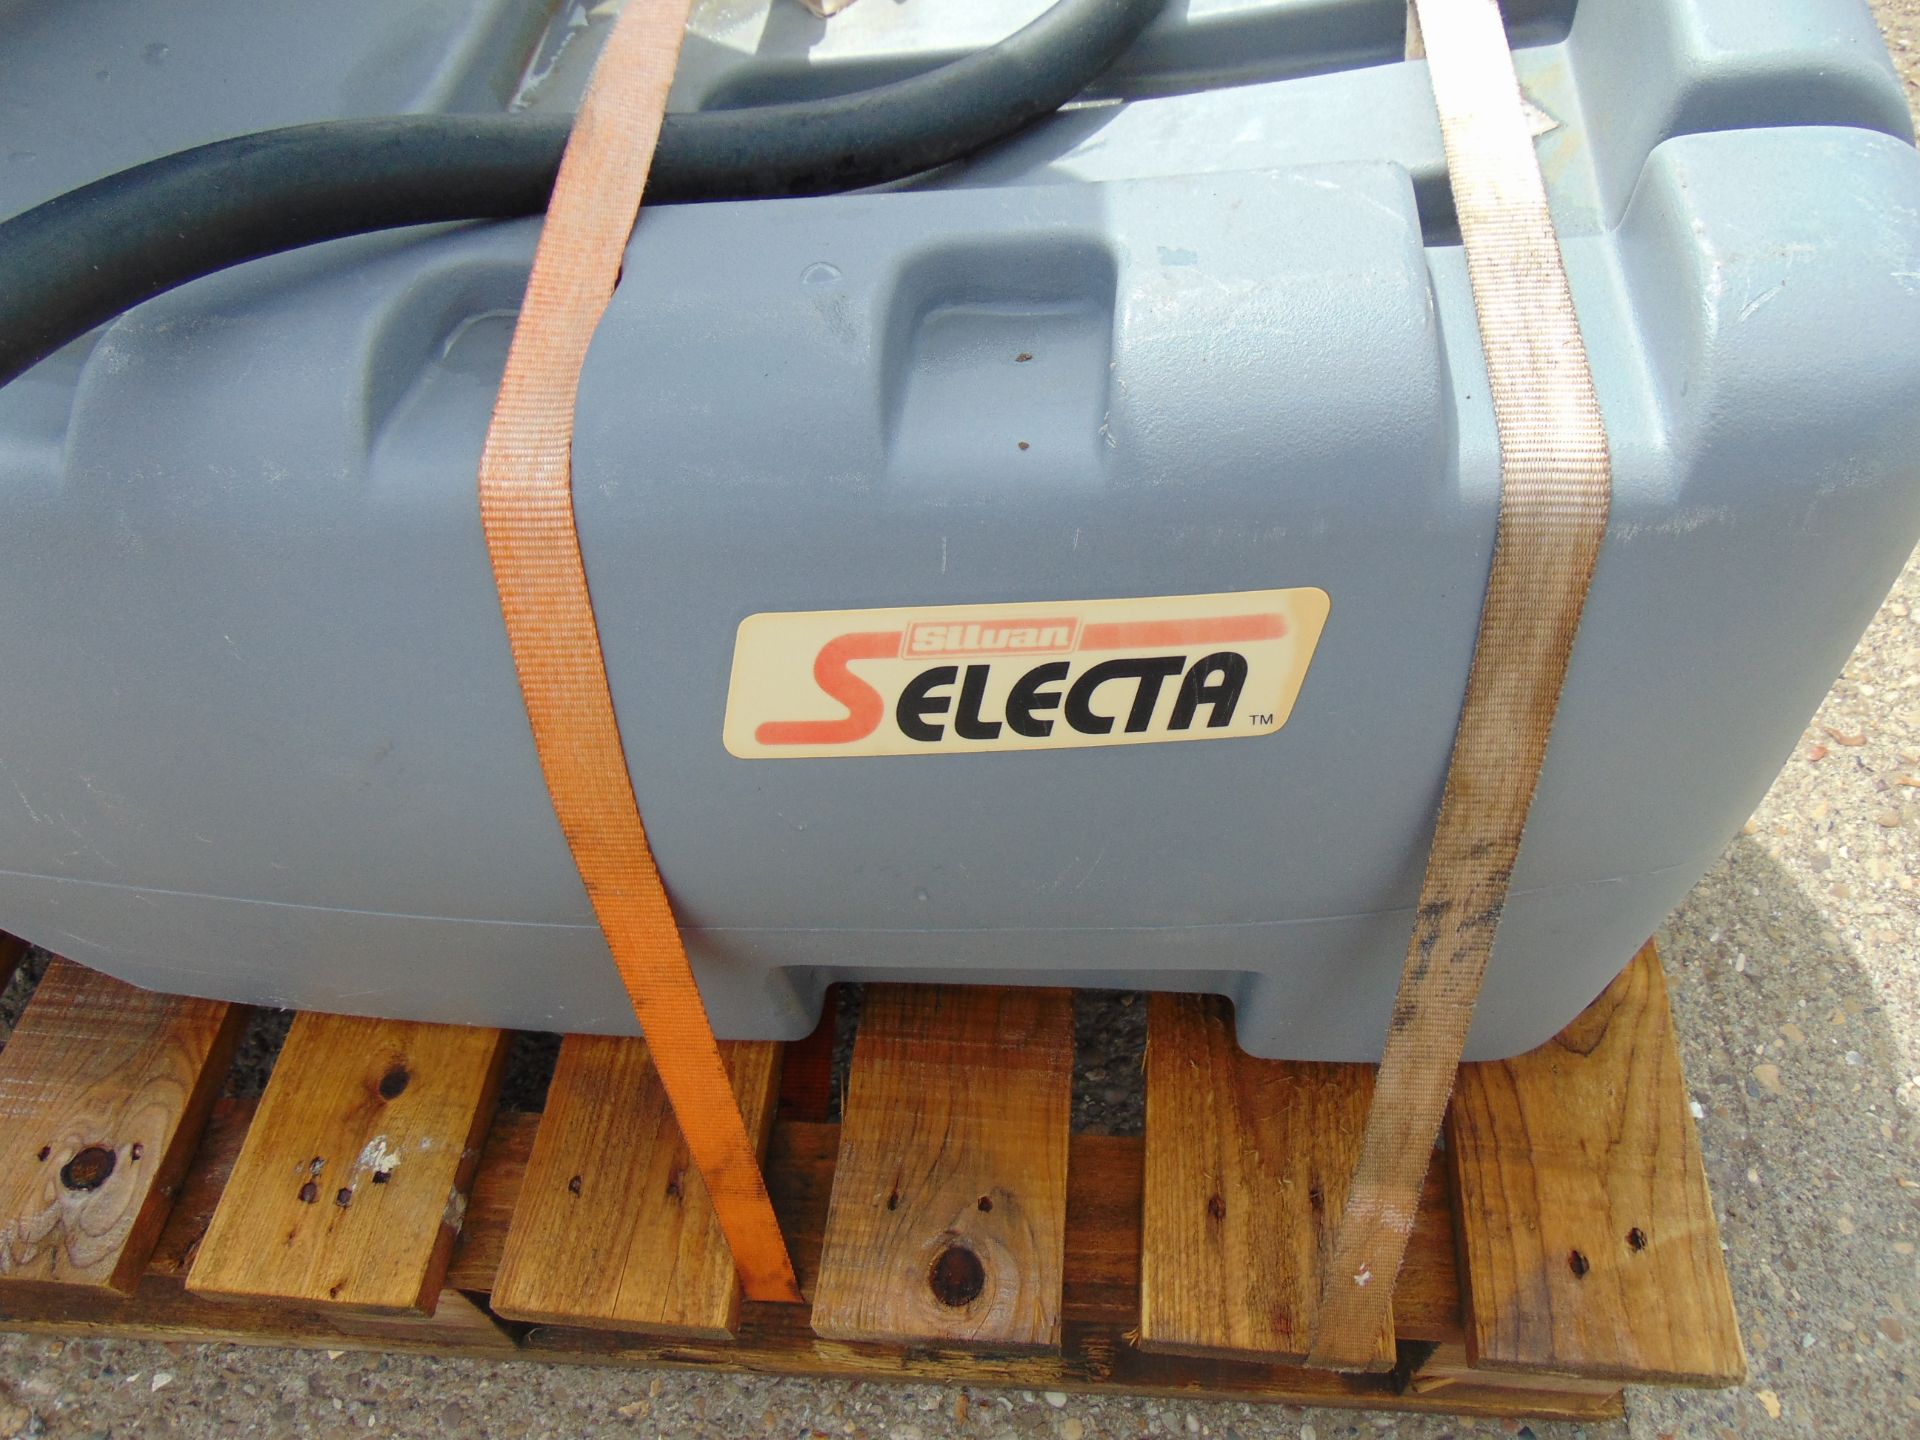 Selecta 200 Litre 50 Gall Portable Refuel Tank c/w 12Volt Pump Hose and Automatic Refuelling Nozzle - Image 11 of 14